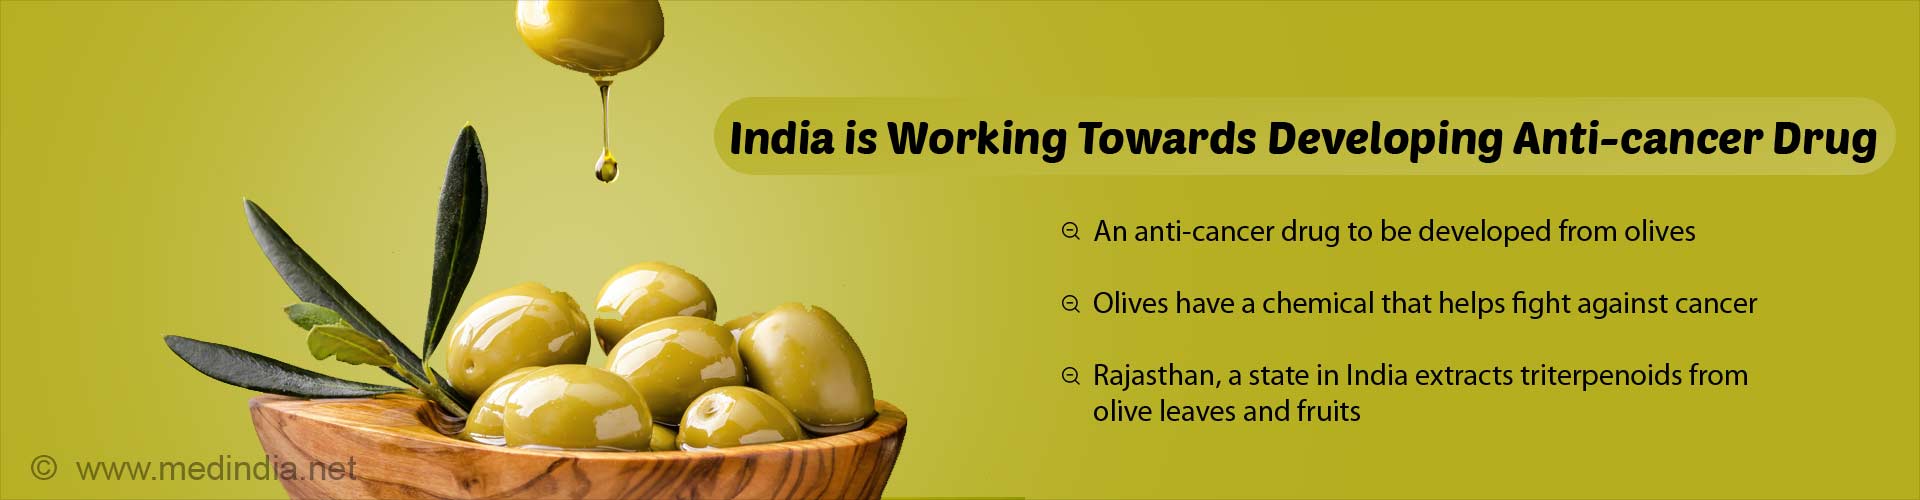 India is working towards developing anti-cancer drug
- an anti-cancer drug to be developed from olives
- olives have a chemical that helps fight against cancer
- rajasthan, a state in india extracts tri-terpenoids from olive leaves and fruits